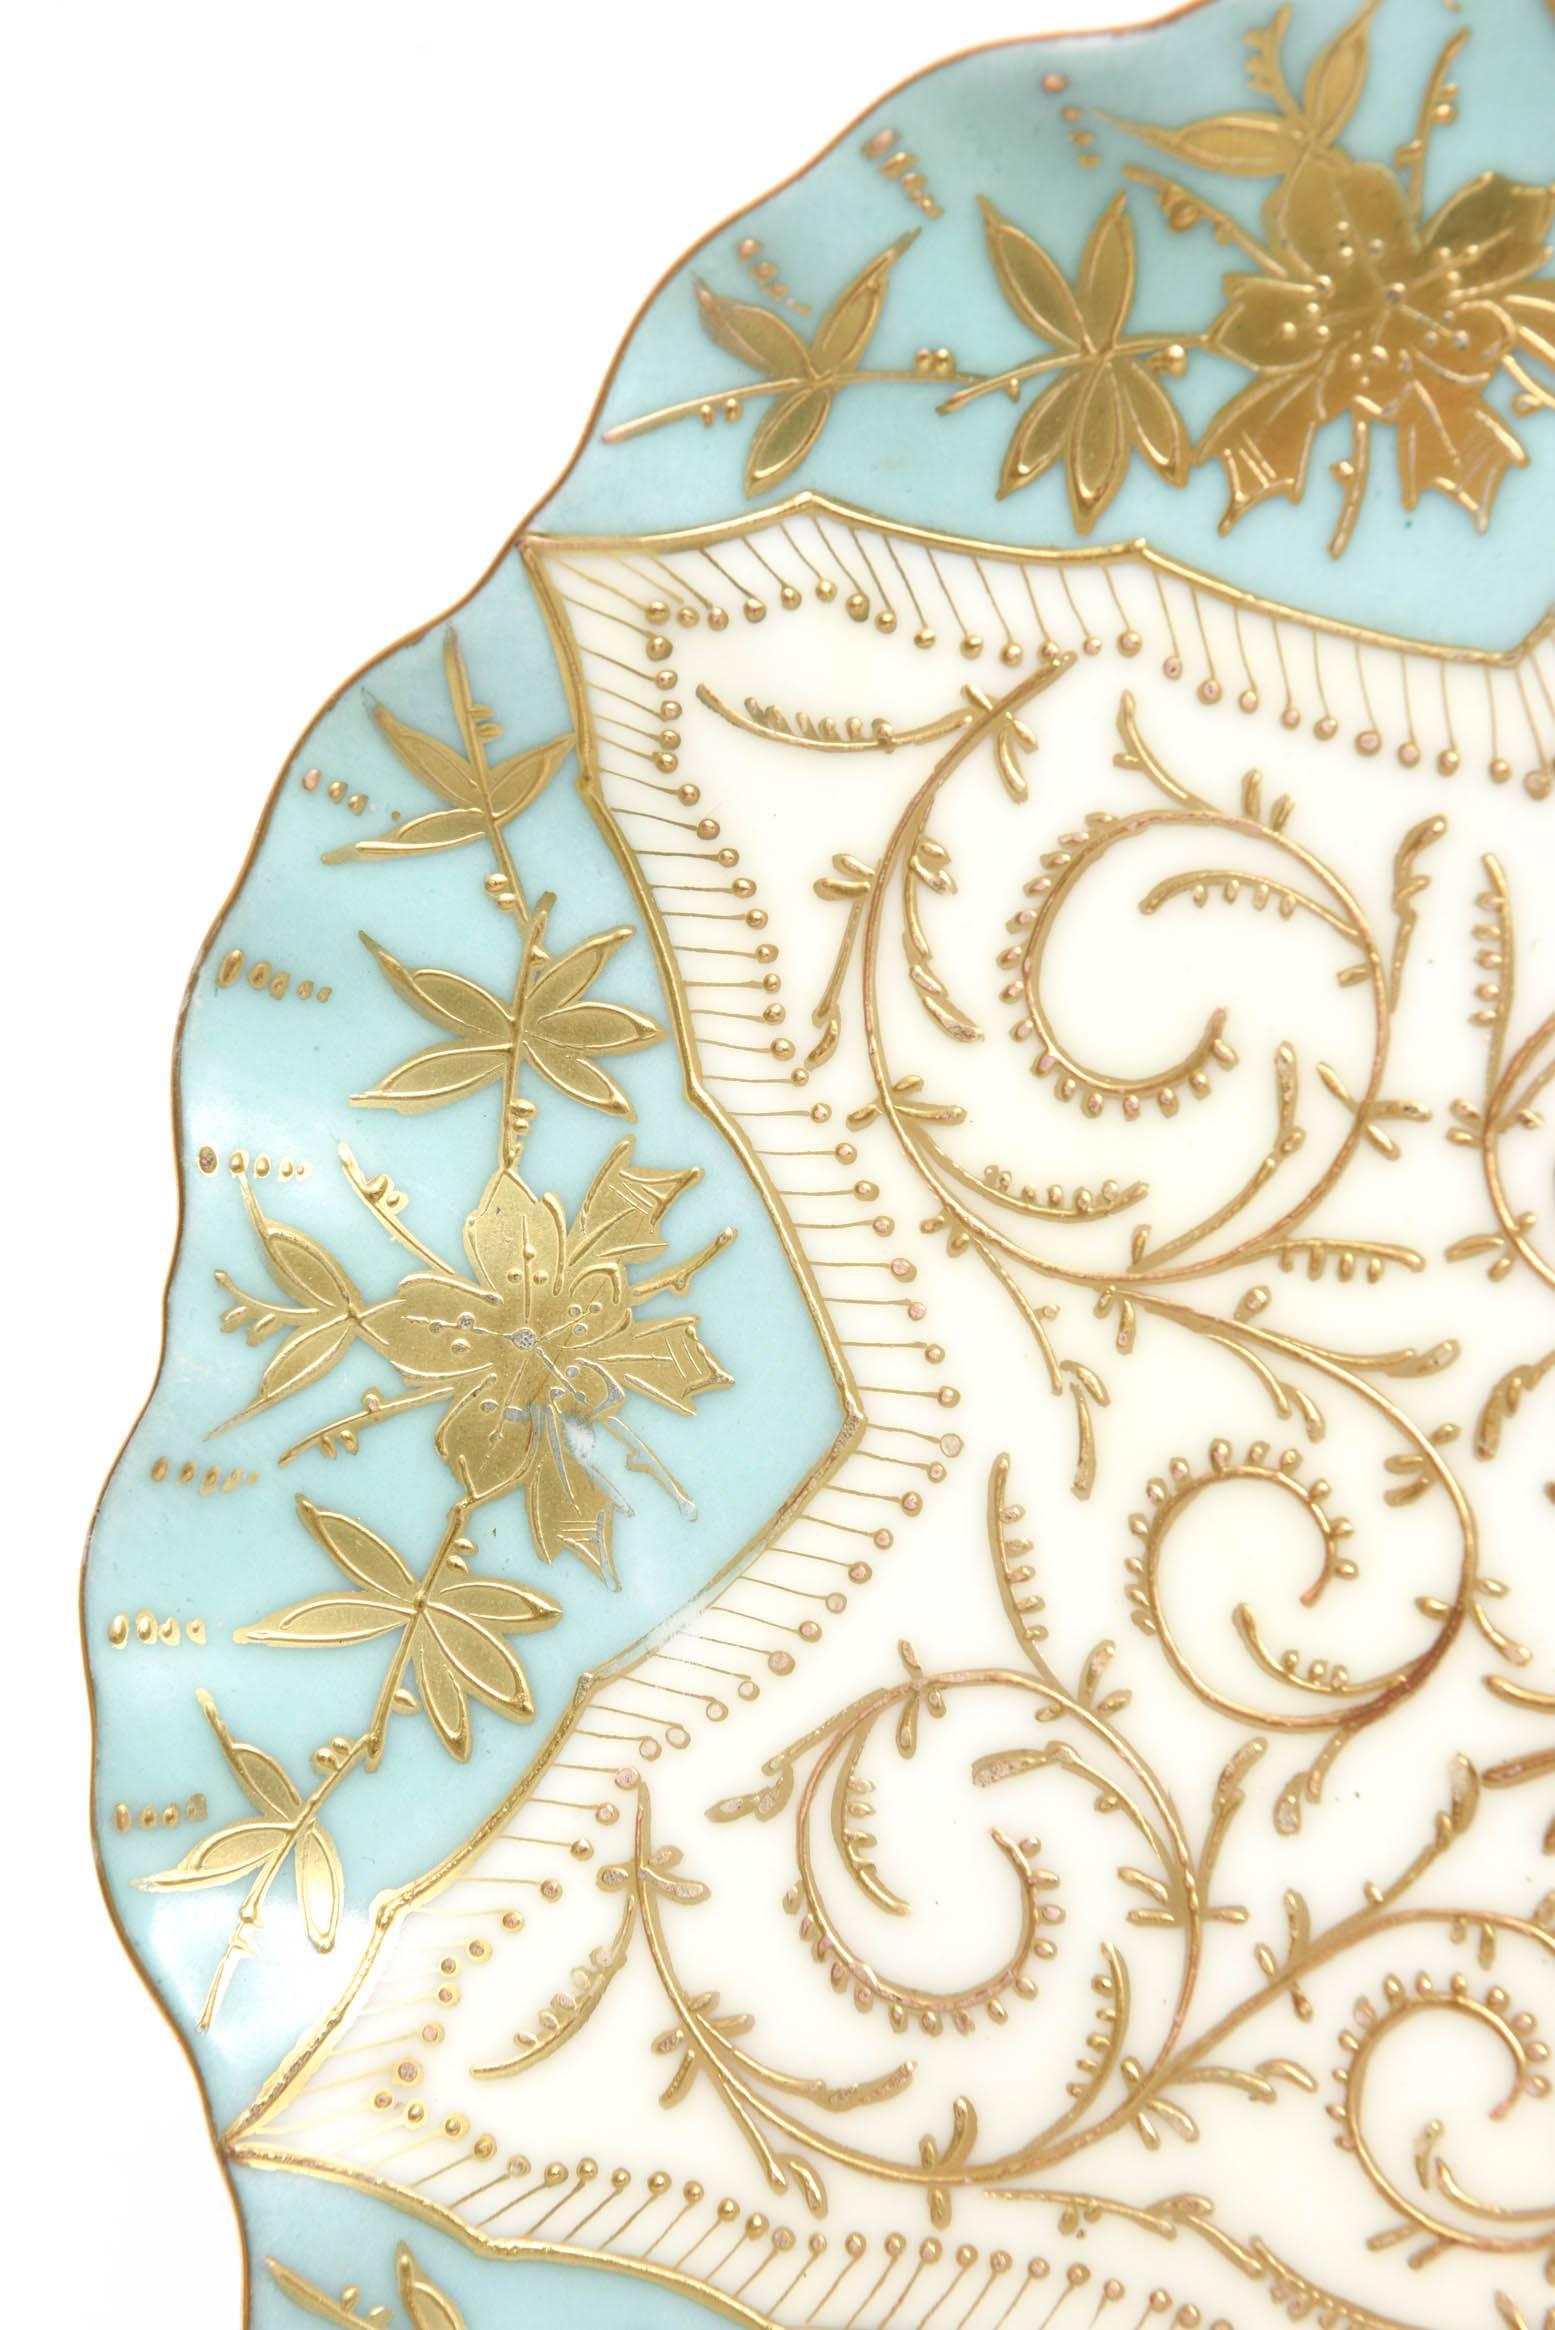 Hand-Crafted Ten Elaborately Decorated Turquoise Gilt Dessert or Display Plates, 19th Century